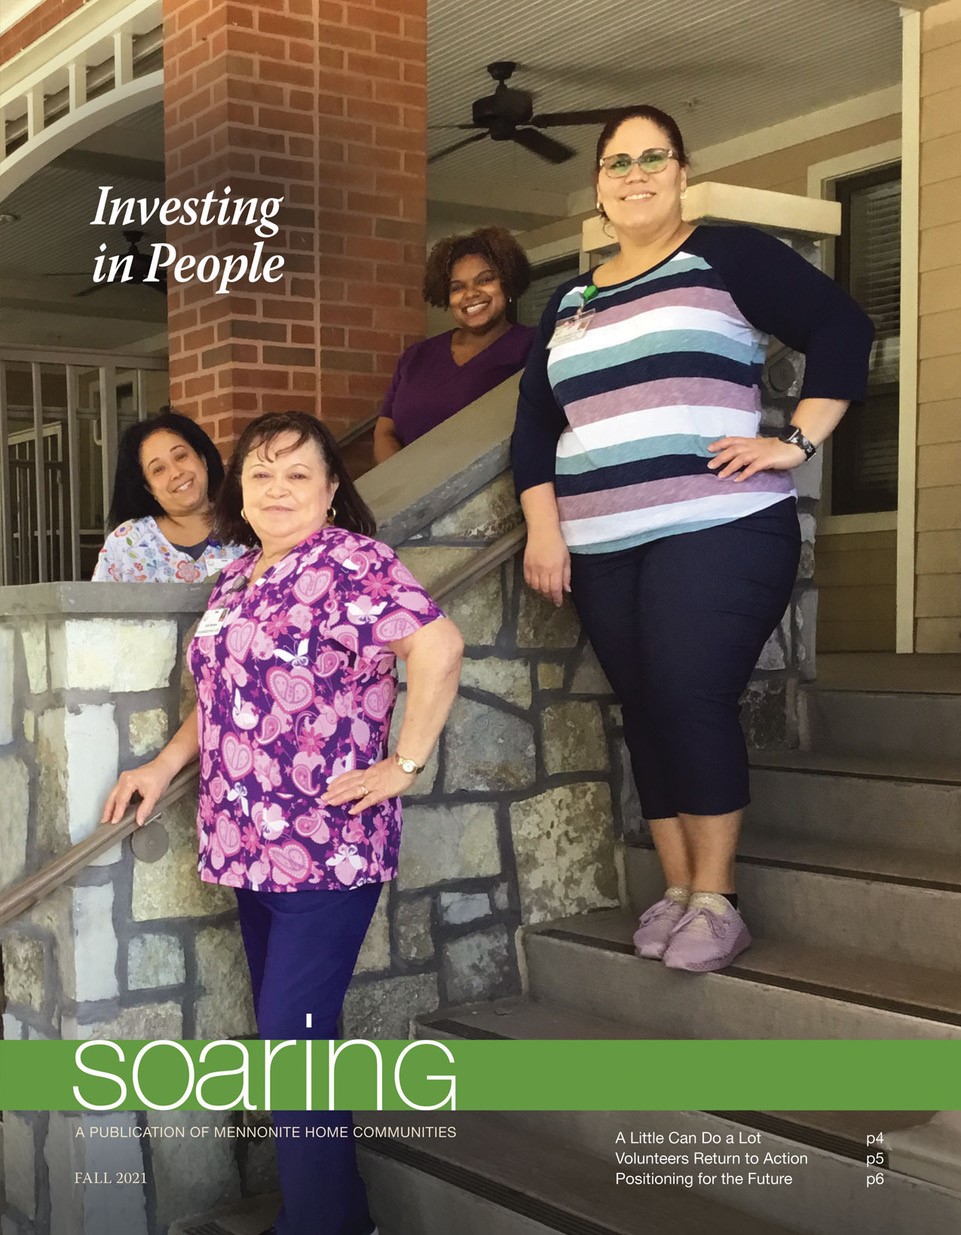 Four women smiling on the cover of the Summer 2021 Soaring Newsletter of Mennonite Home Communities